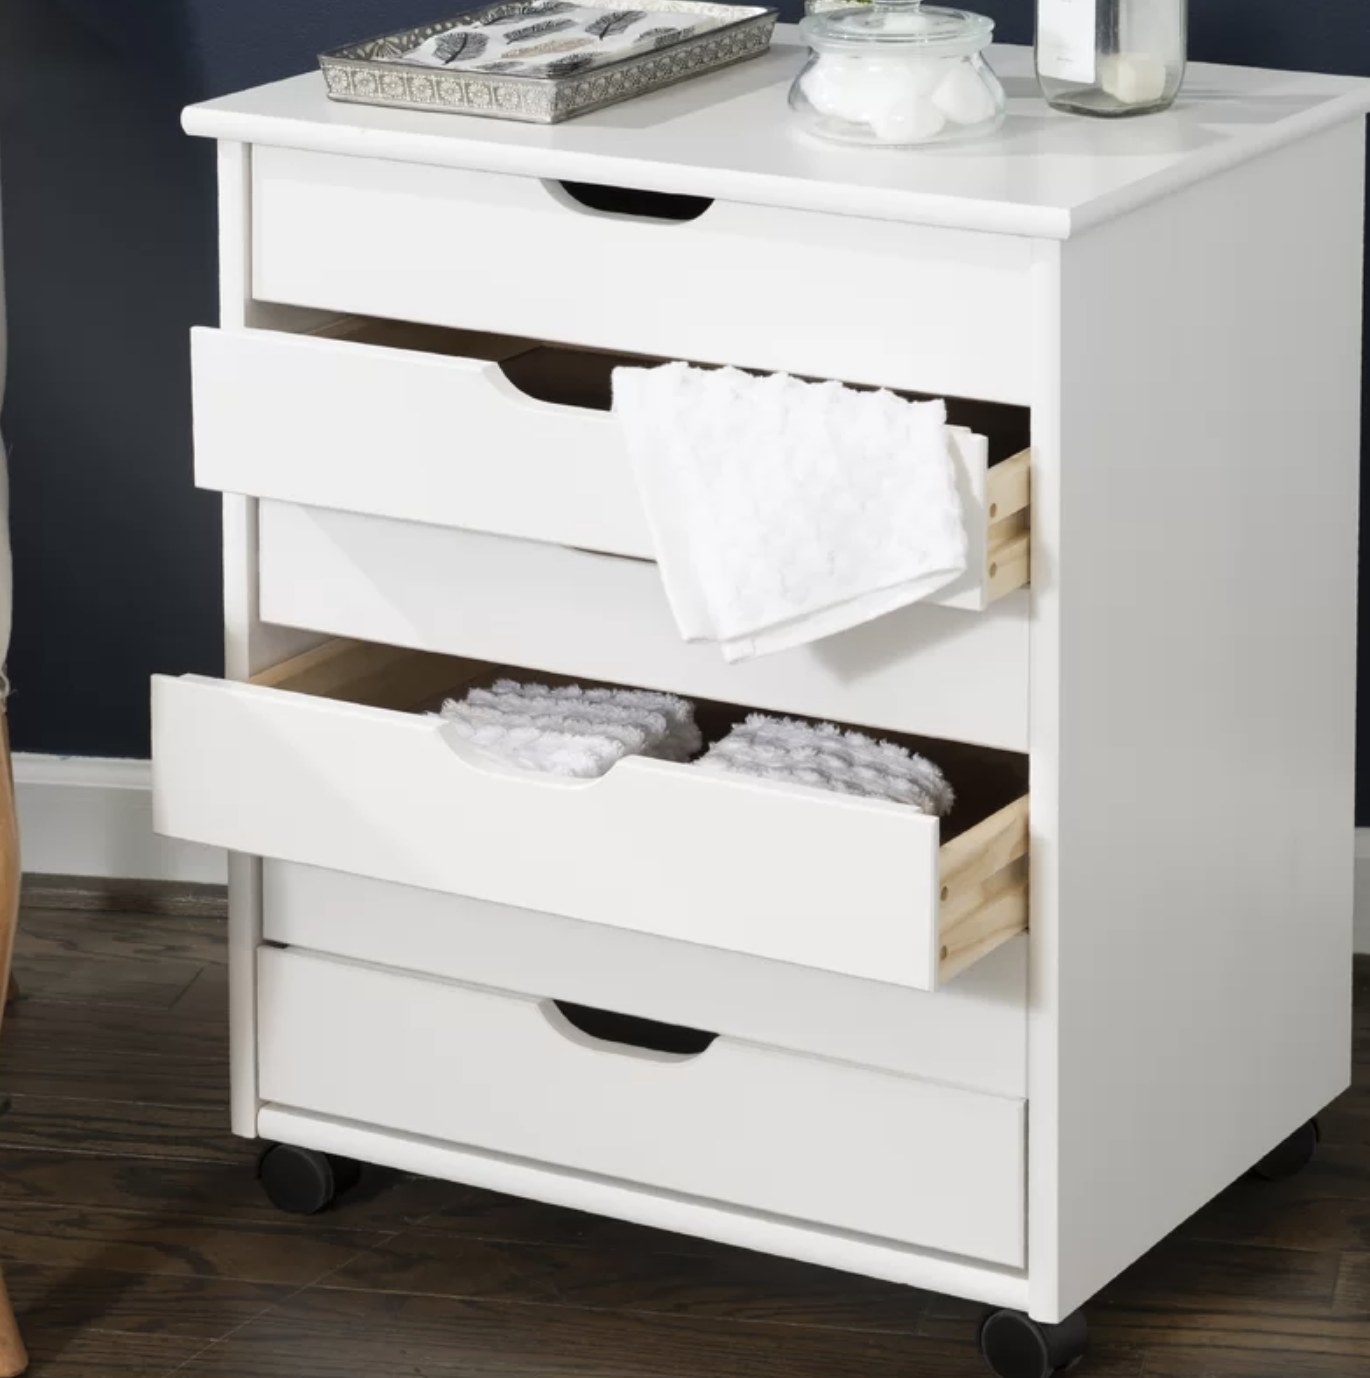 The vertical shelf unit is white and and has six rectangular pull-out drawers